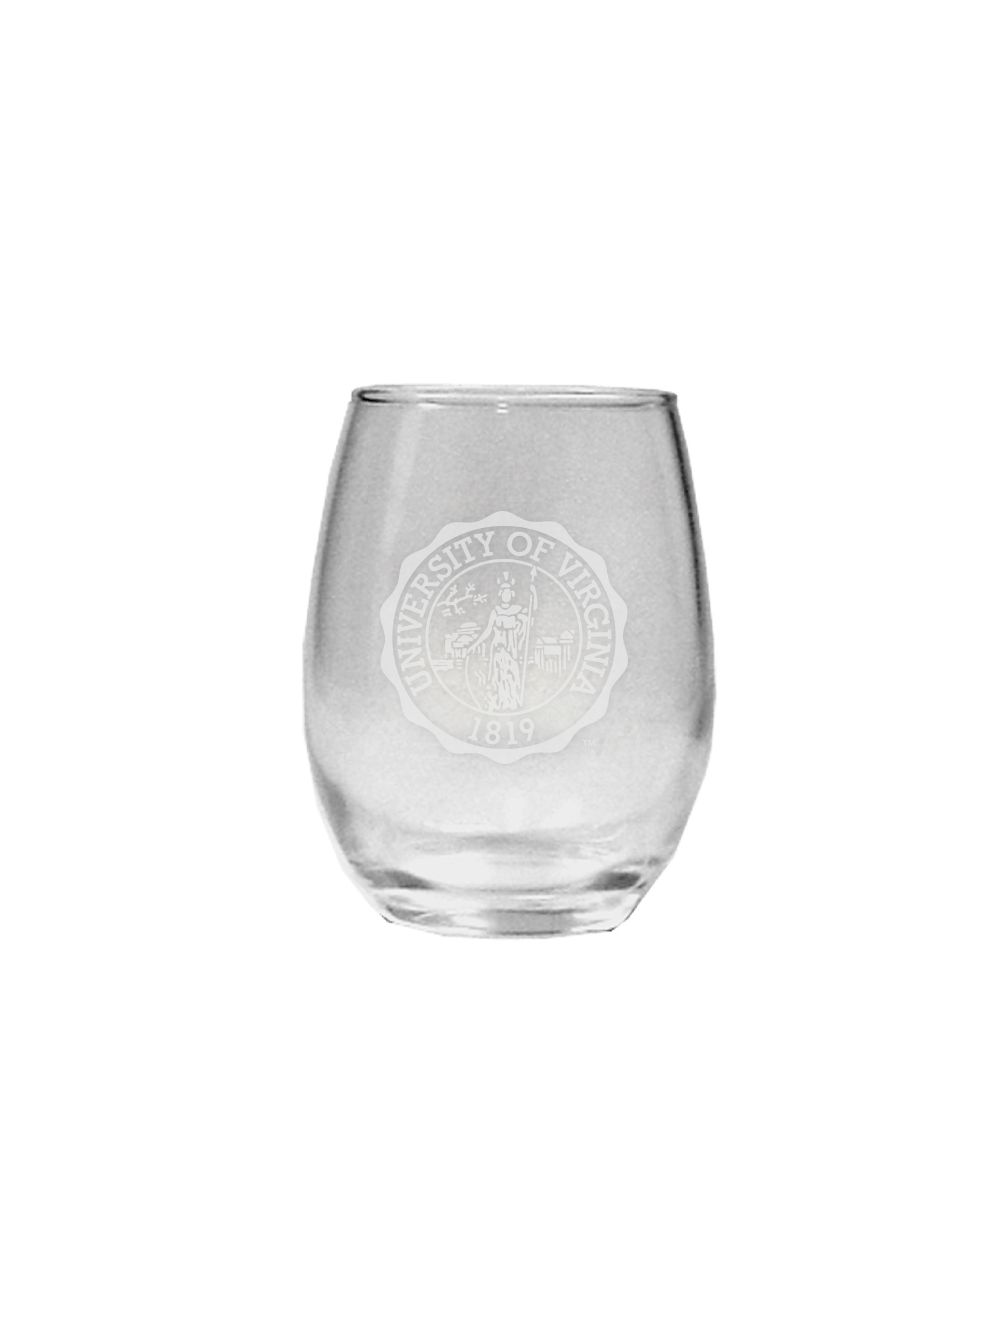 https://mincers.com/media/catalog/product/cache/33958134c3eee94557aec7c86a48adbc/rdi/rdi/etched-stemless-wine-glass-201407_1.jpg